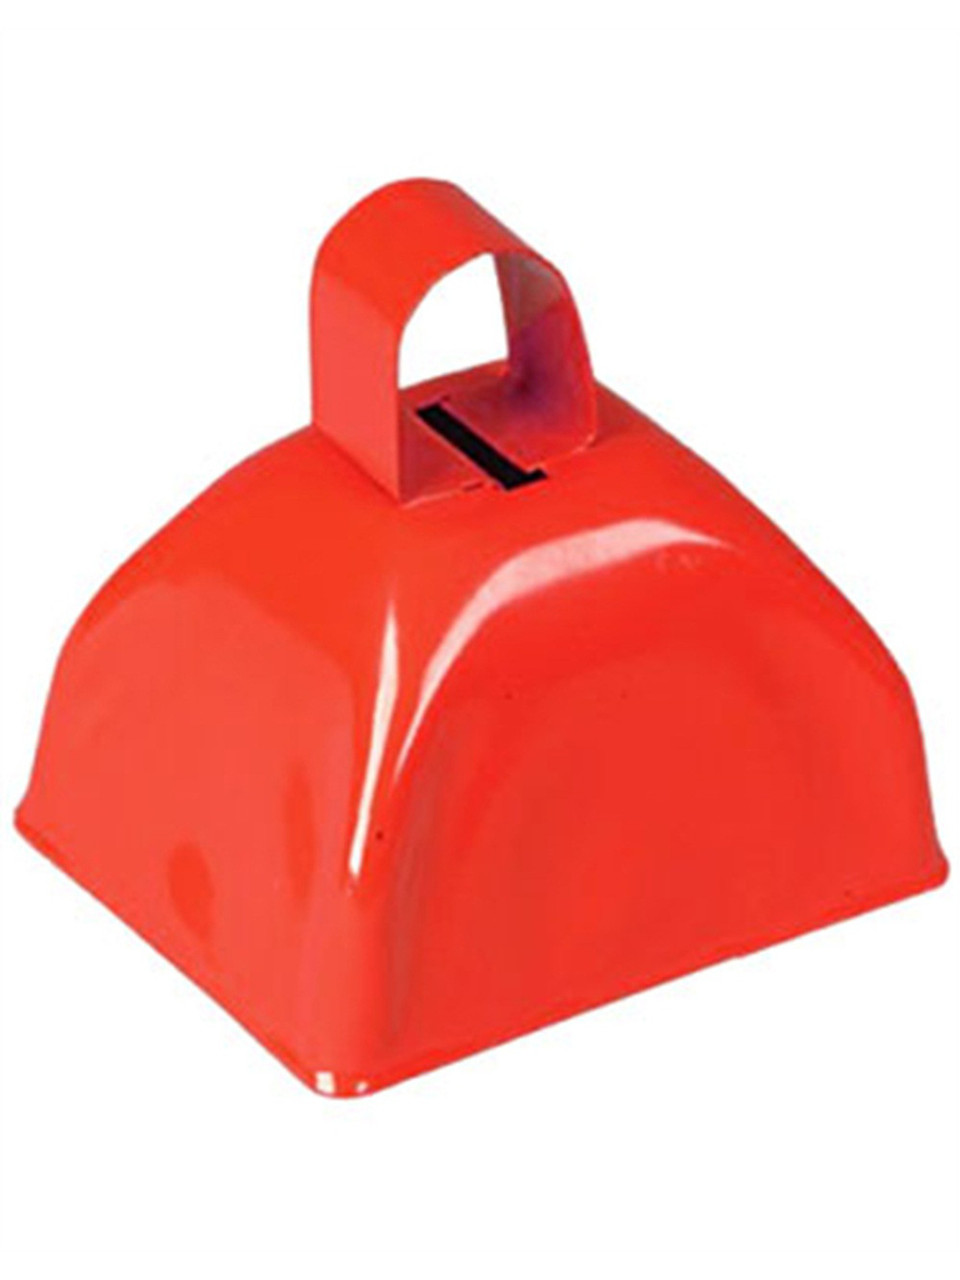 3 Inch Red Metal Cow Bell Cowbell Party Noise Maker